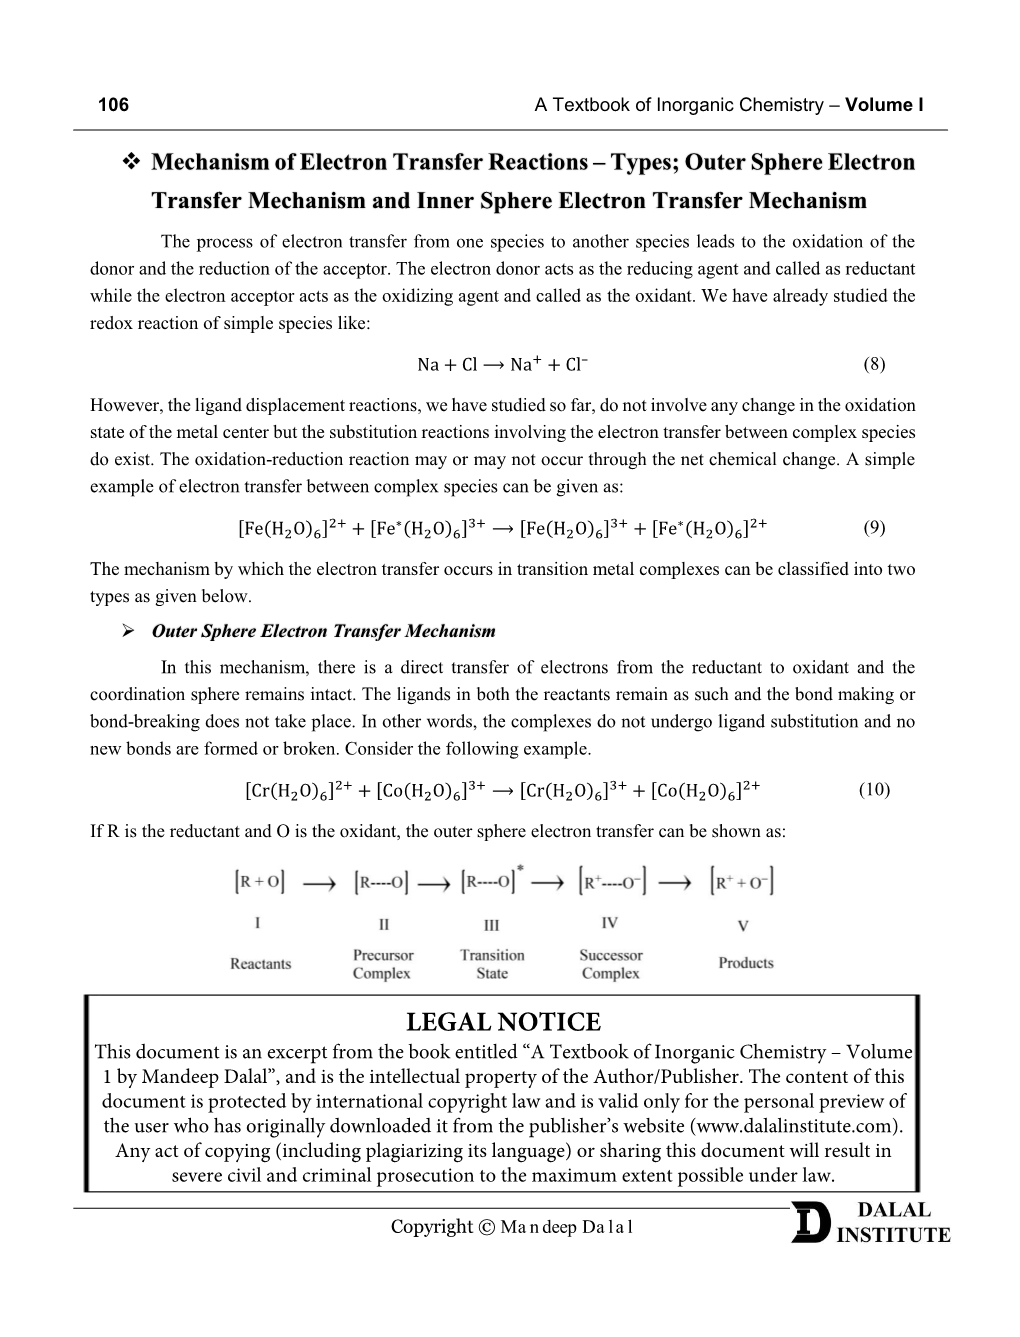 Mechanism of Electron Transfer Reactions